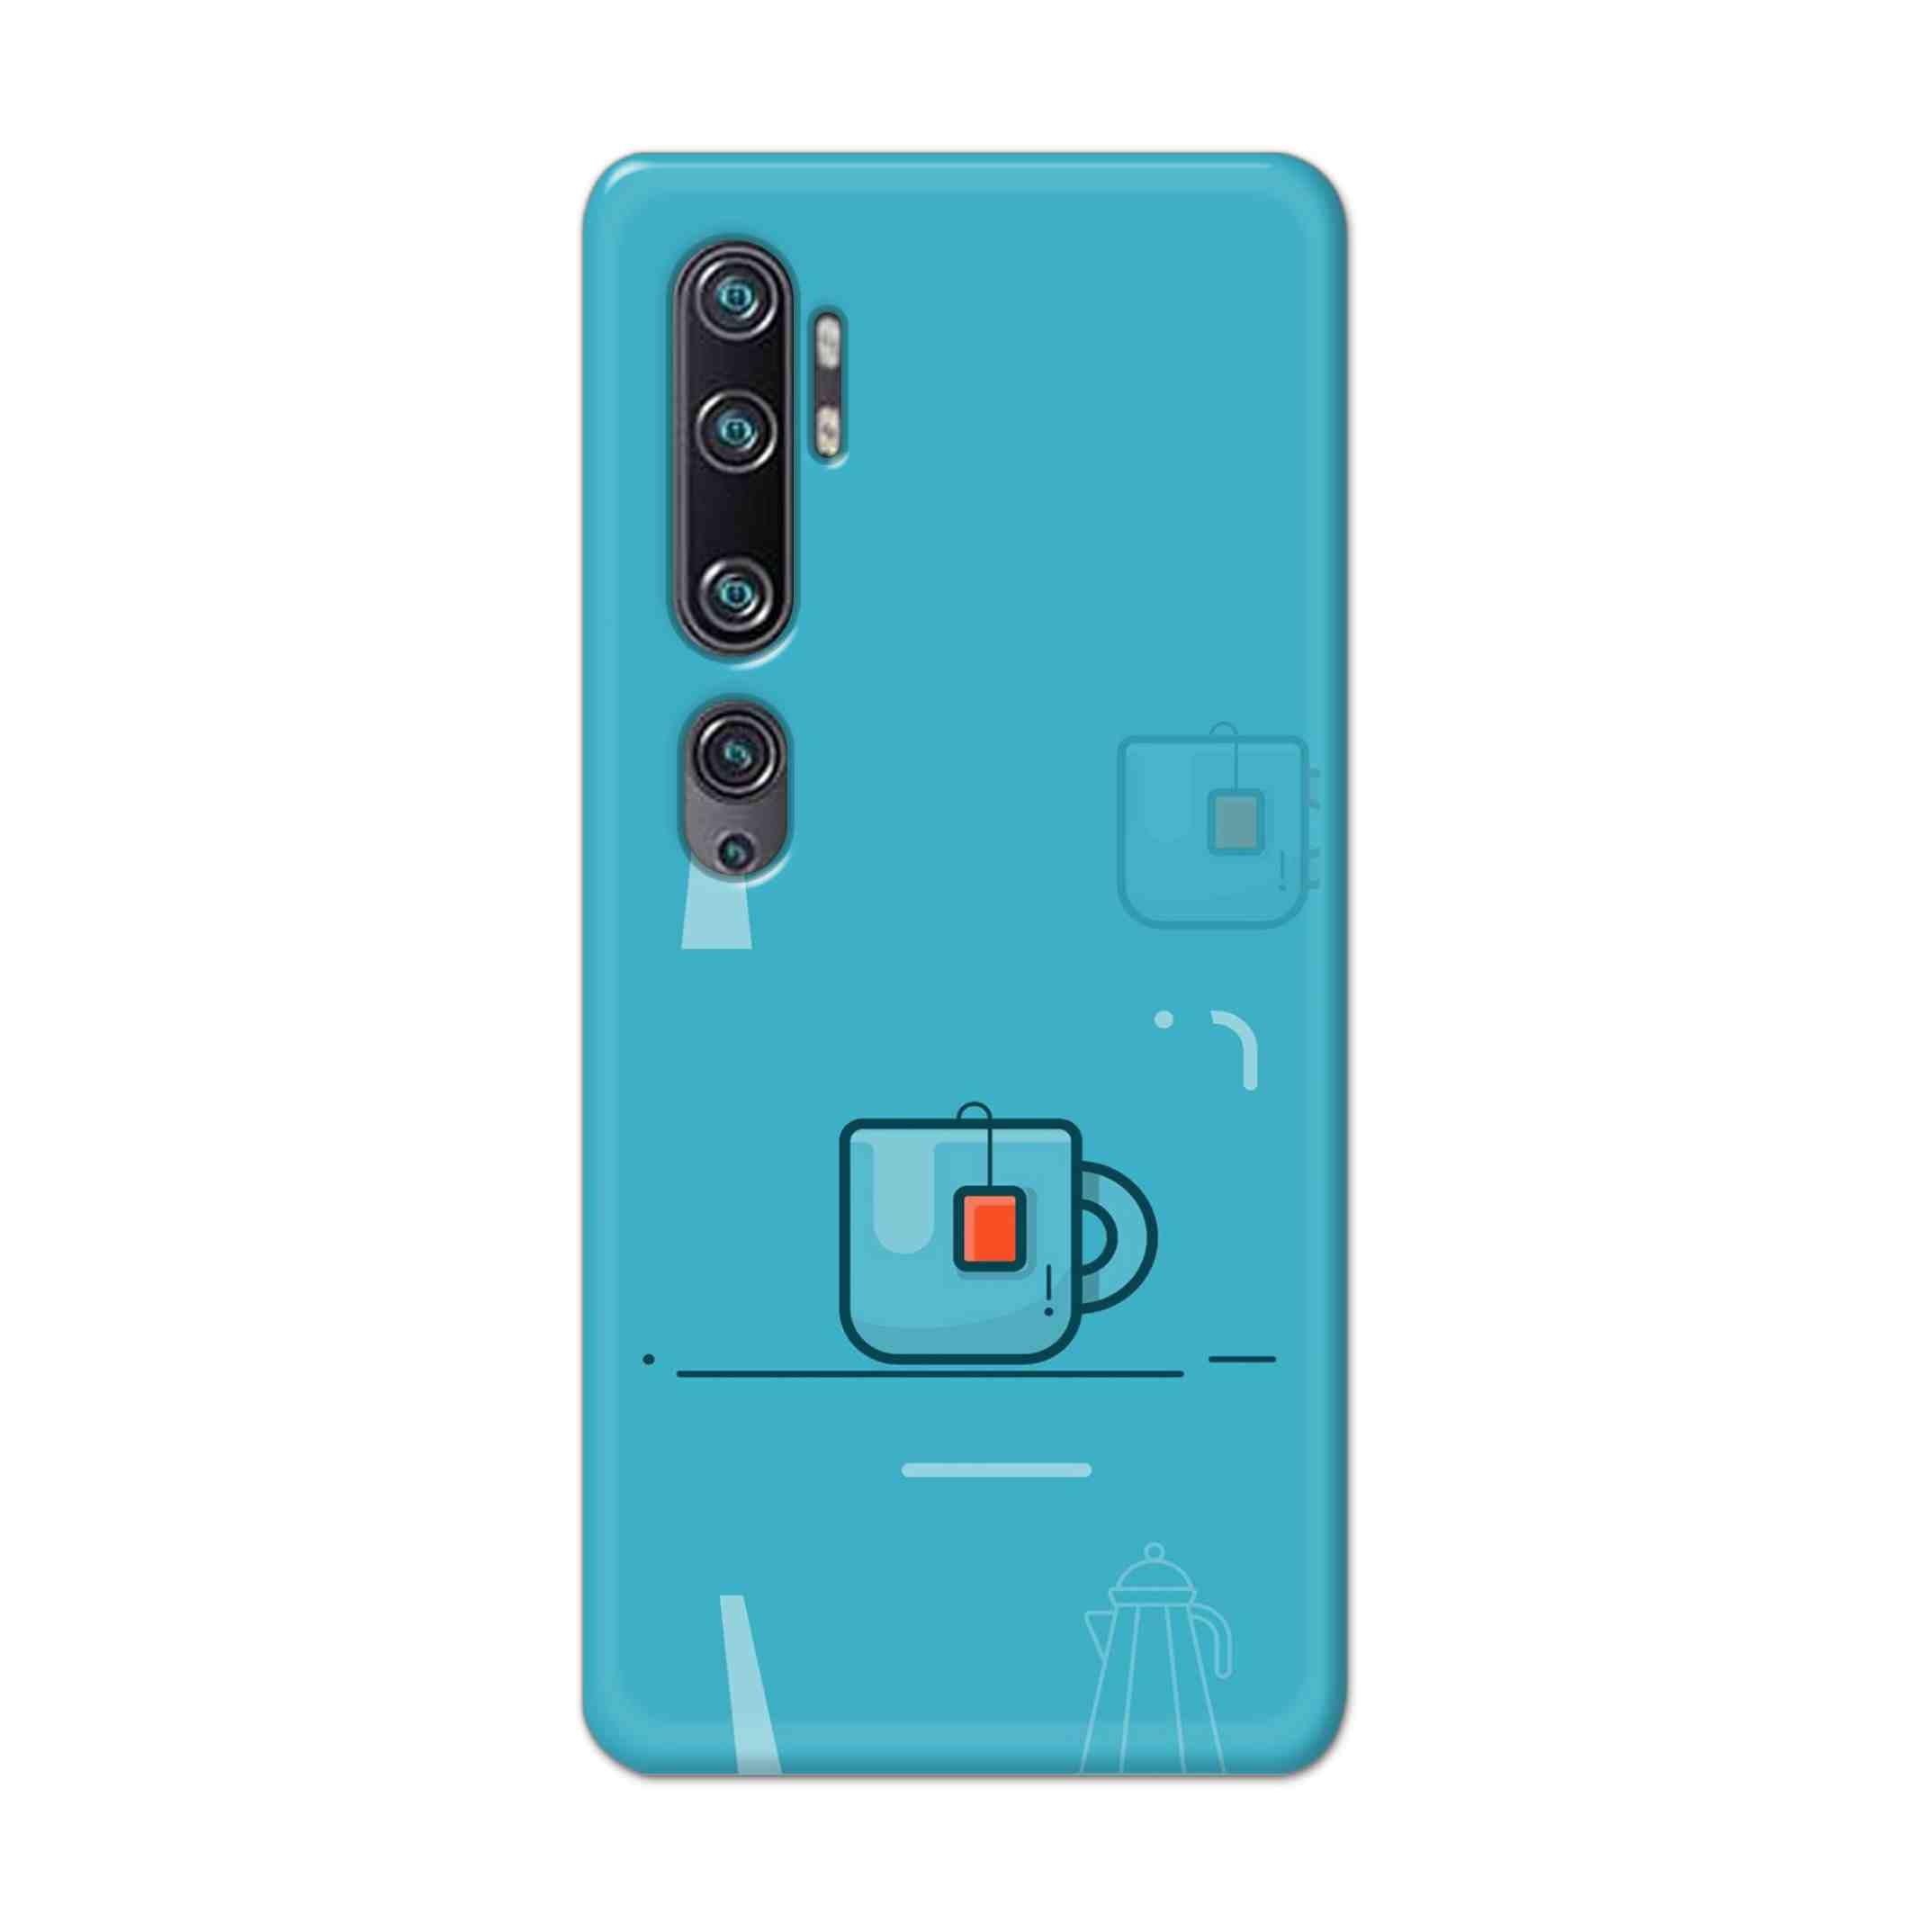 Buy Green Tea Hard Back Mobile Phone Case Cover For Xiaomi Mi Note 10 Online